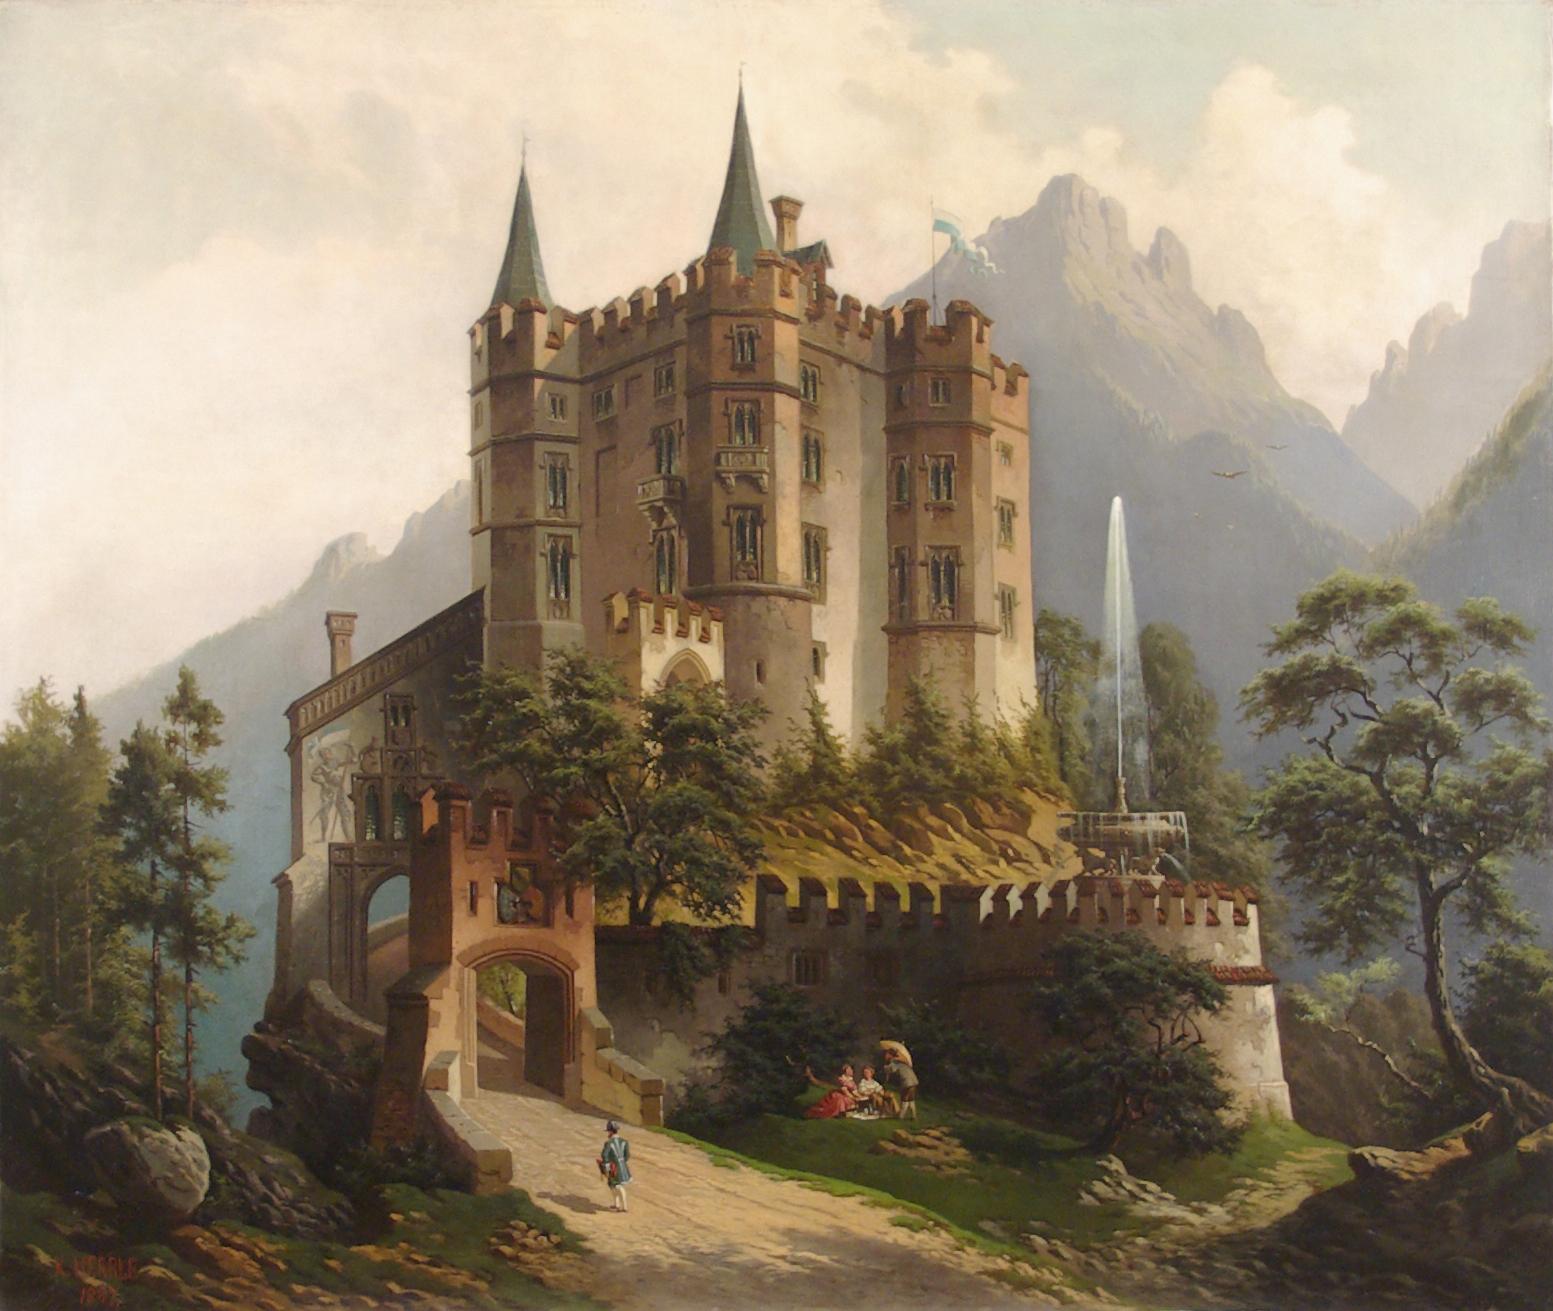 Karl Herrle                                                                             Landscape Painting - A Bavarian Castle in the Mountains   